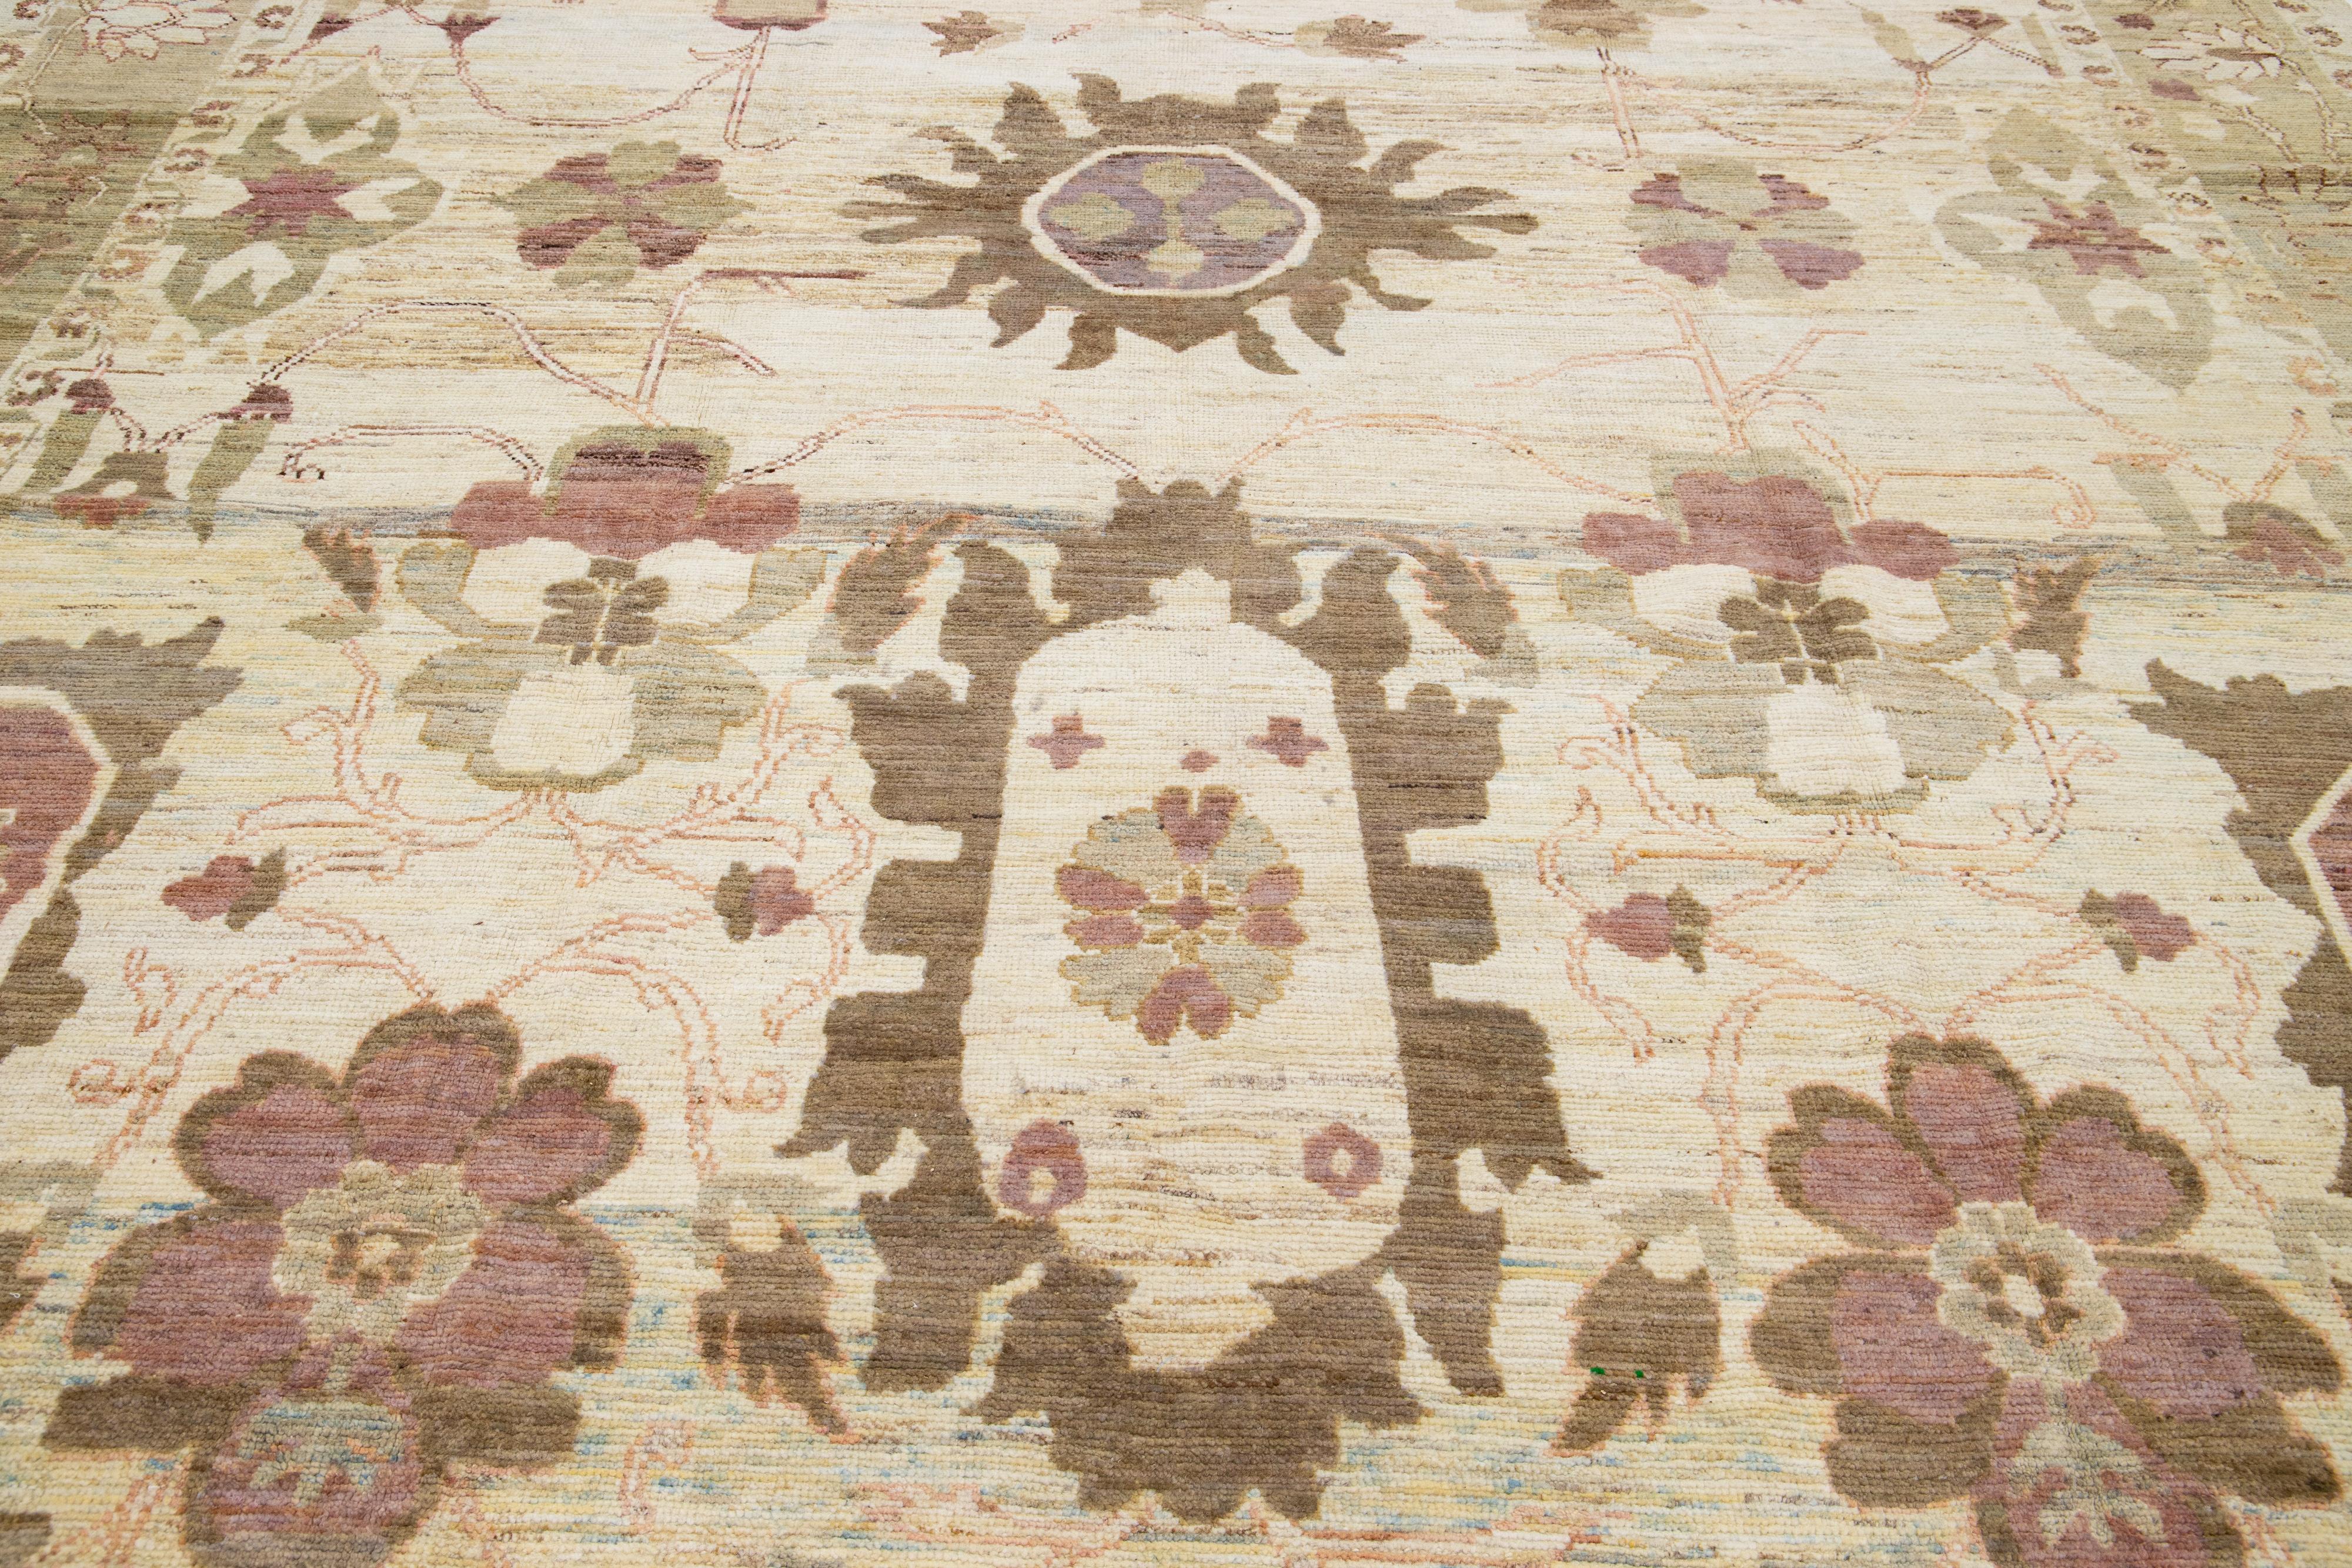 This exquisite Oushak rug, hand-knotted to perfection, boasts a contemporary style set on a beige foundation. This Persian floor-piece is framed by a green border and is beautified with multitudes of colors that culminate into an eye-catching floral